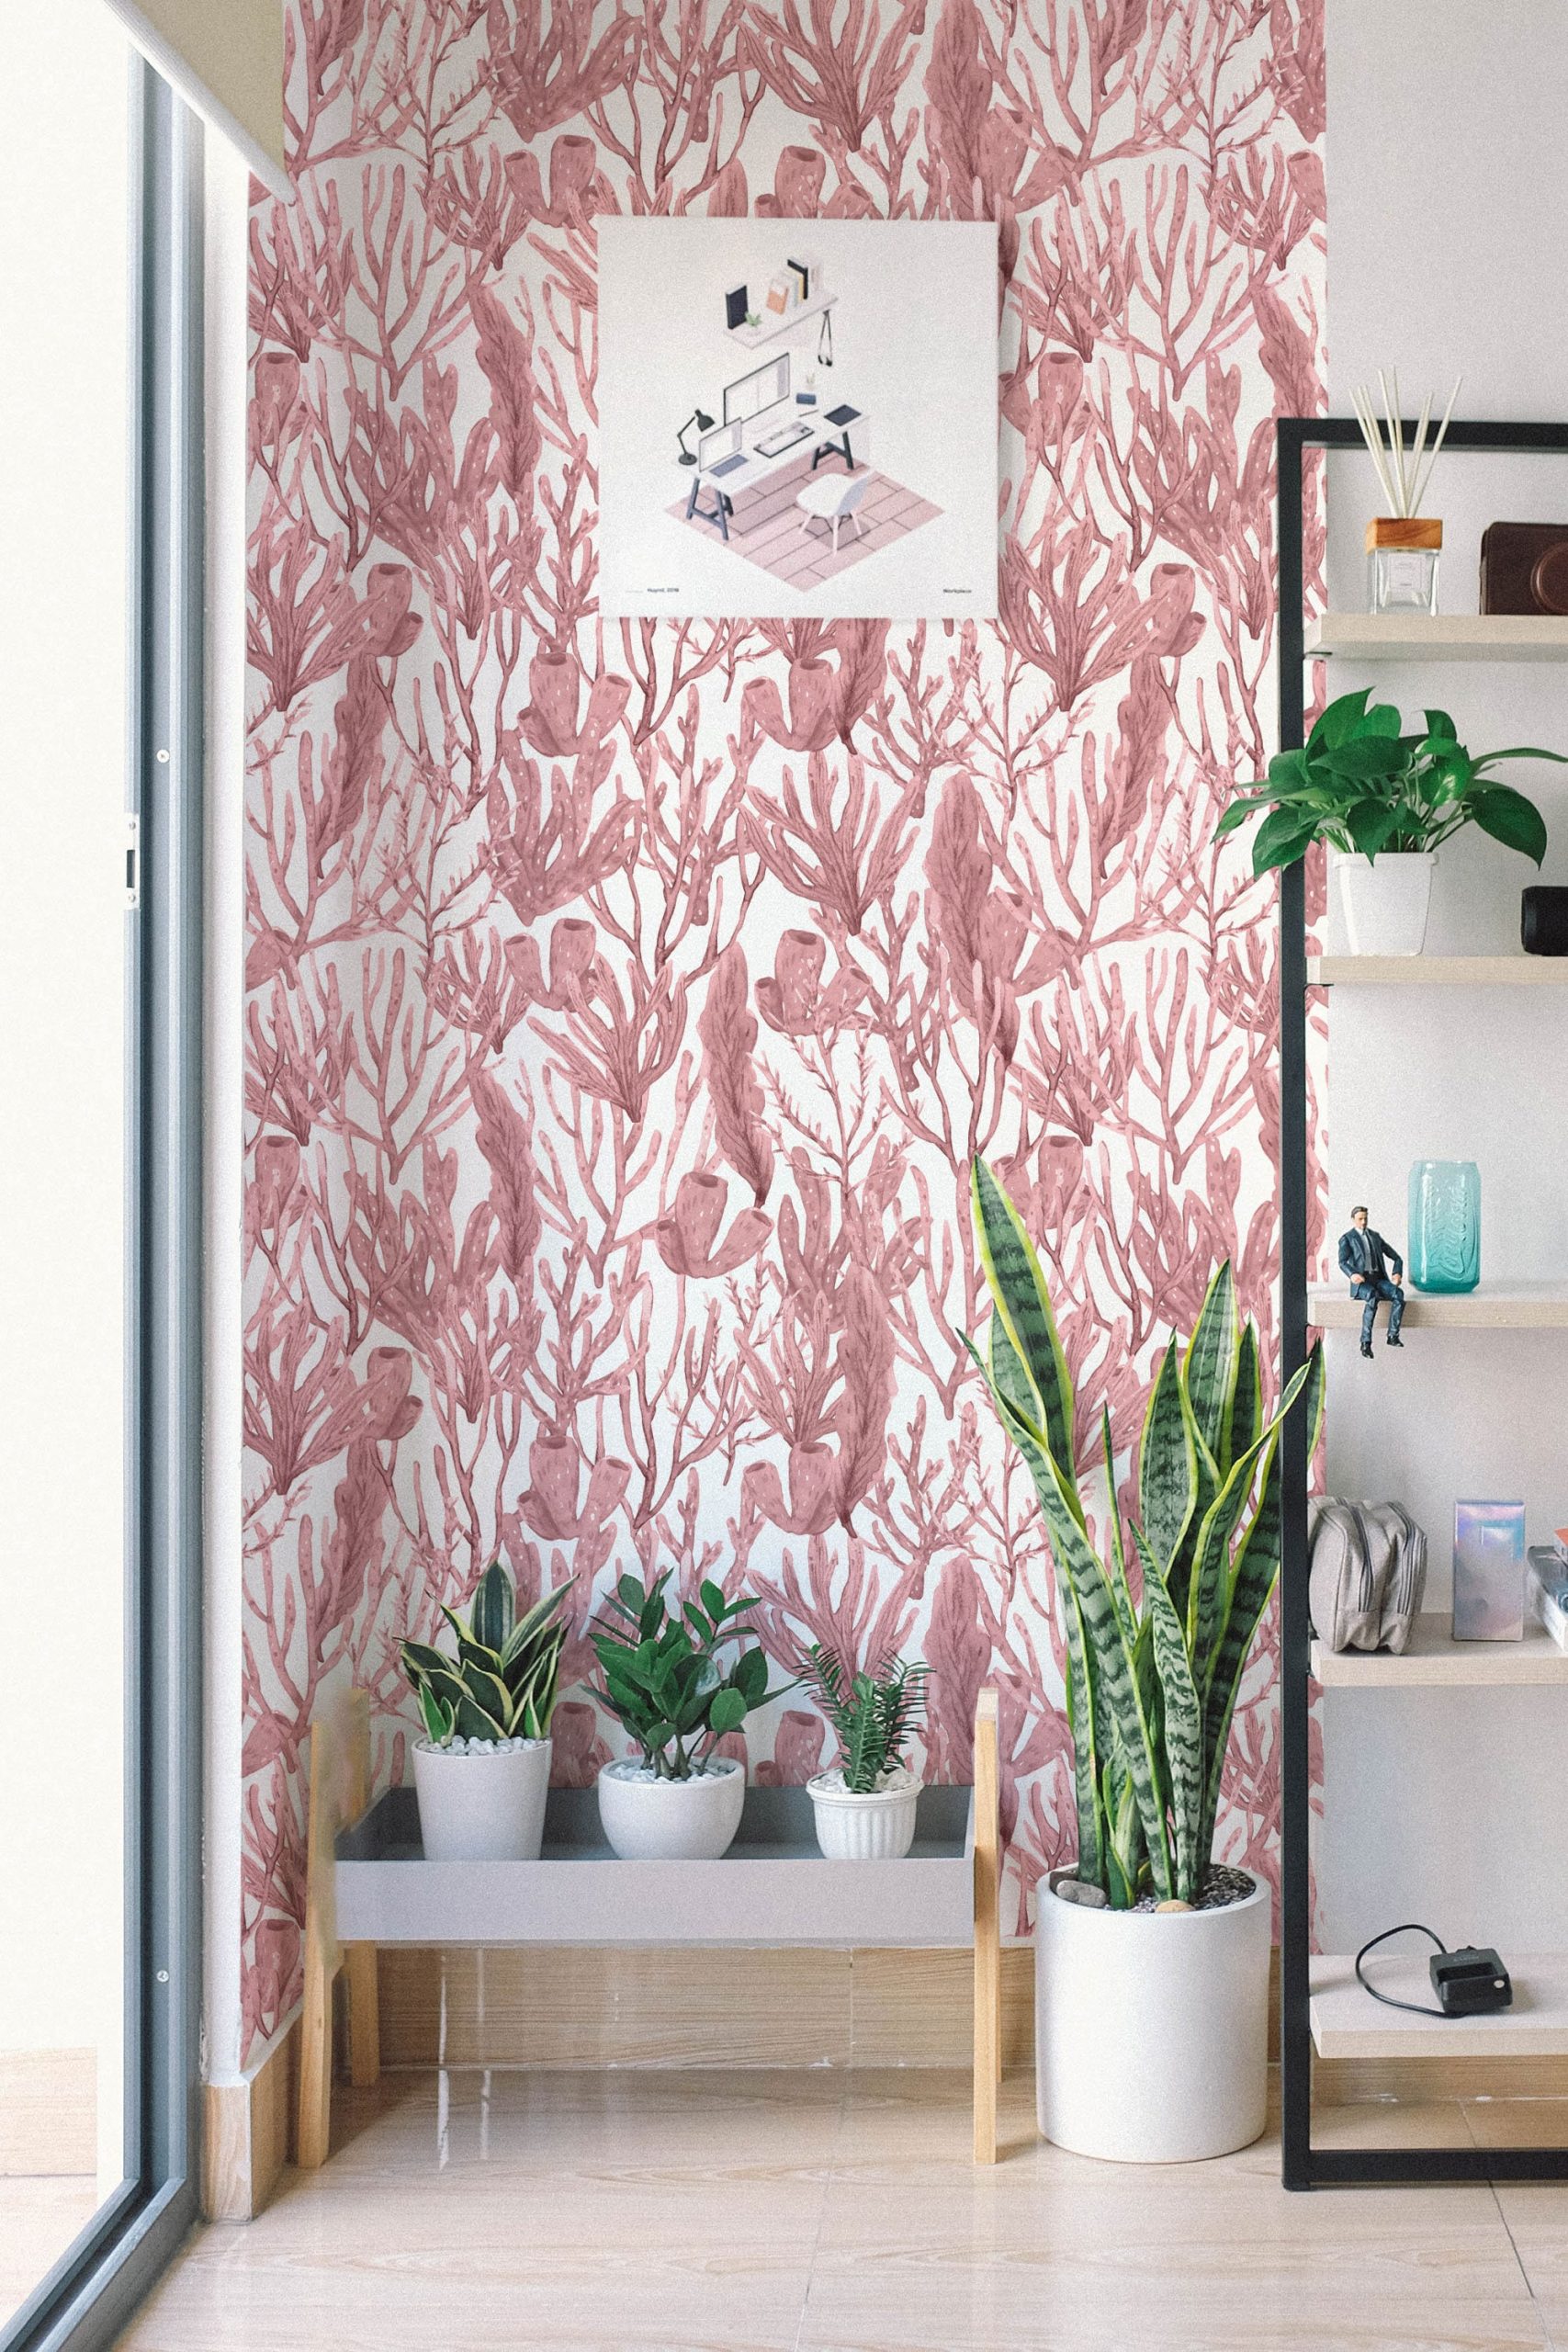 Living Coral Wallpaper Wall Covering Self Adhesive Peel And Stick